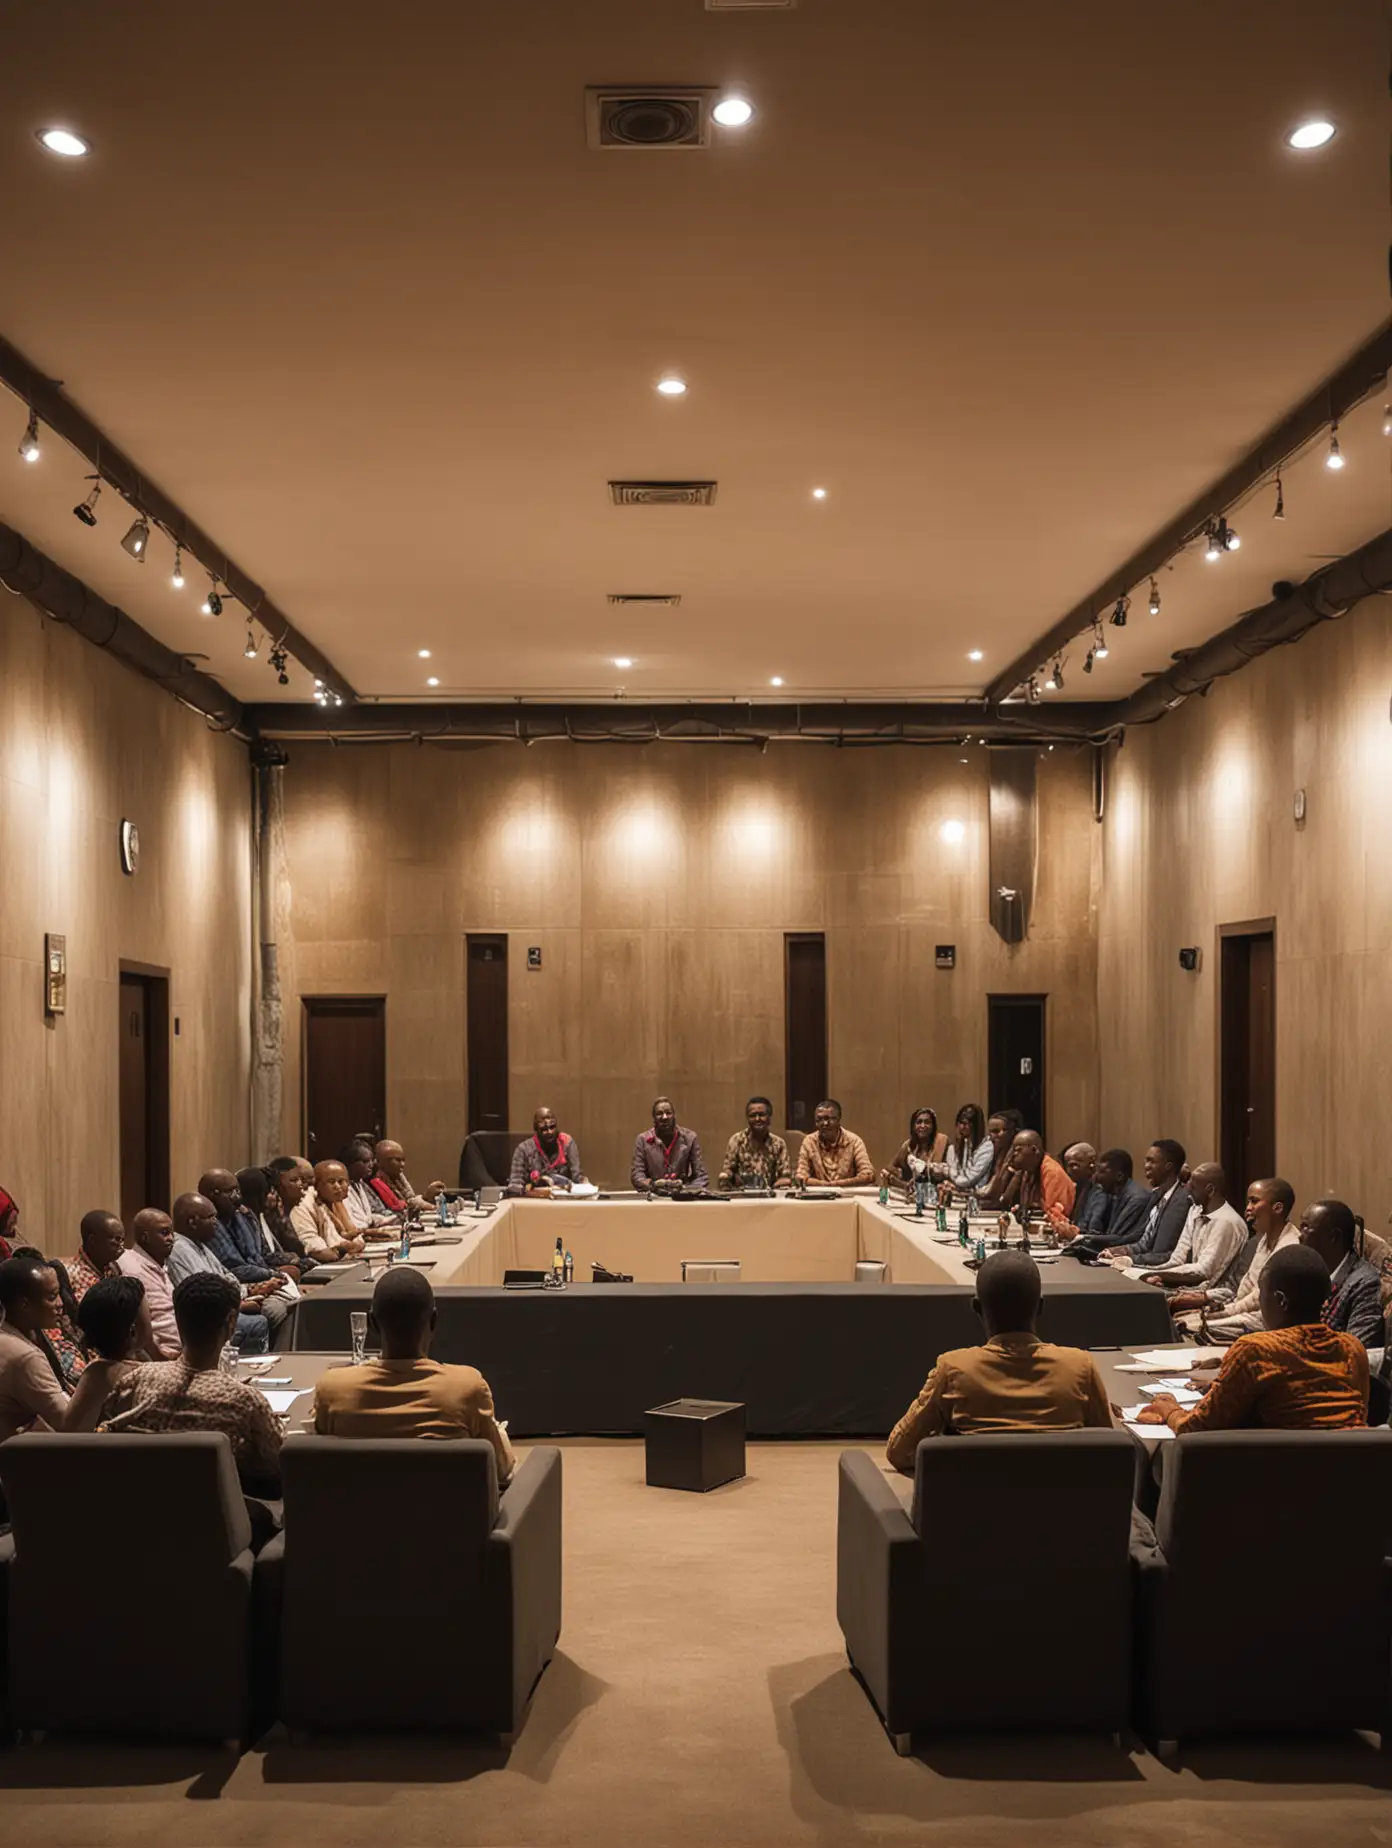 Africans seated  in a modern plush well lit meeting hall. Rear view